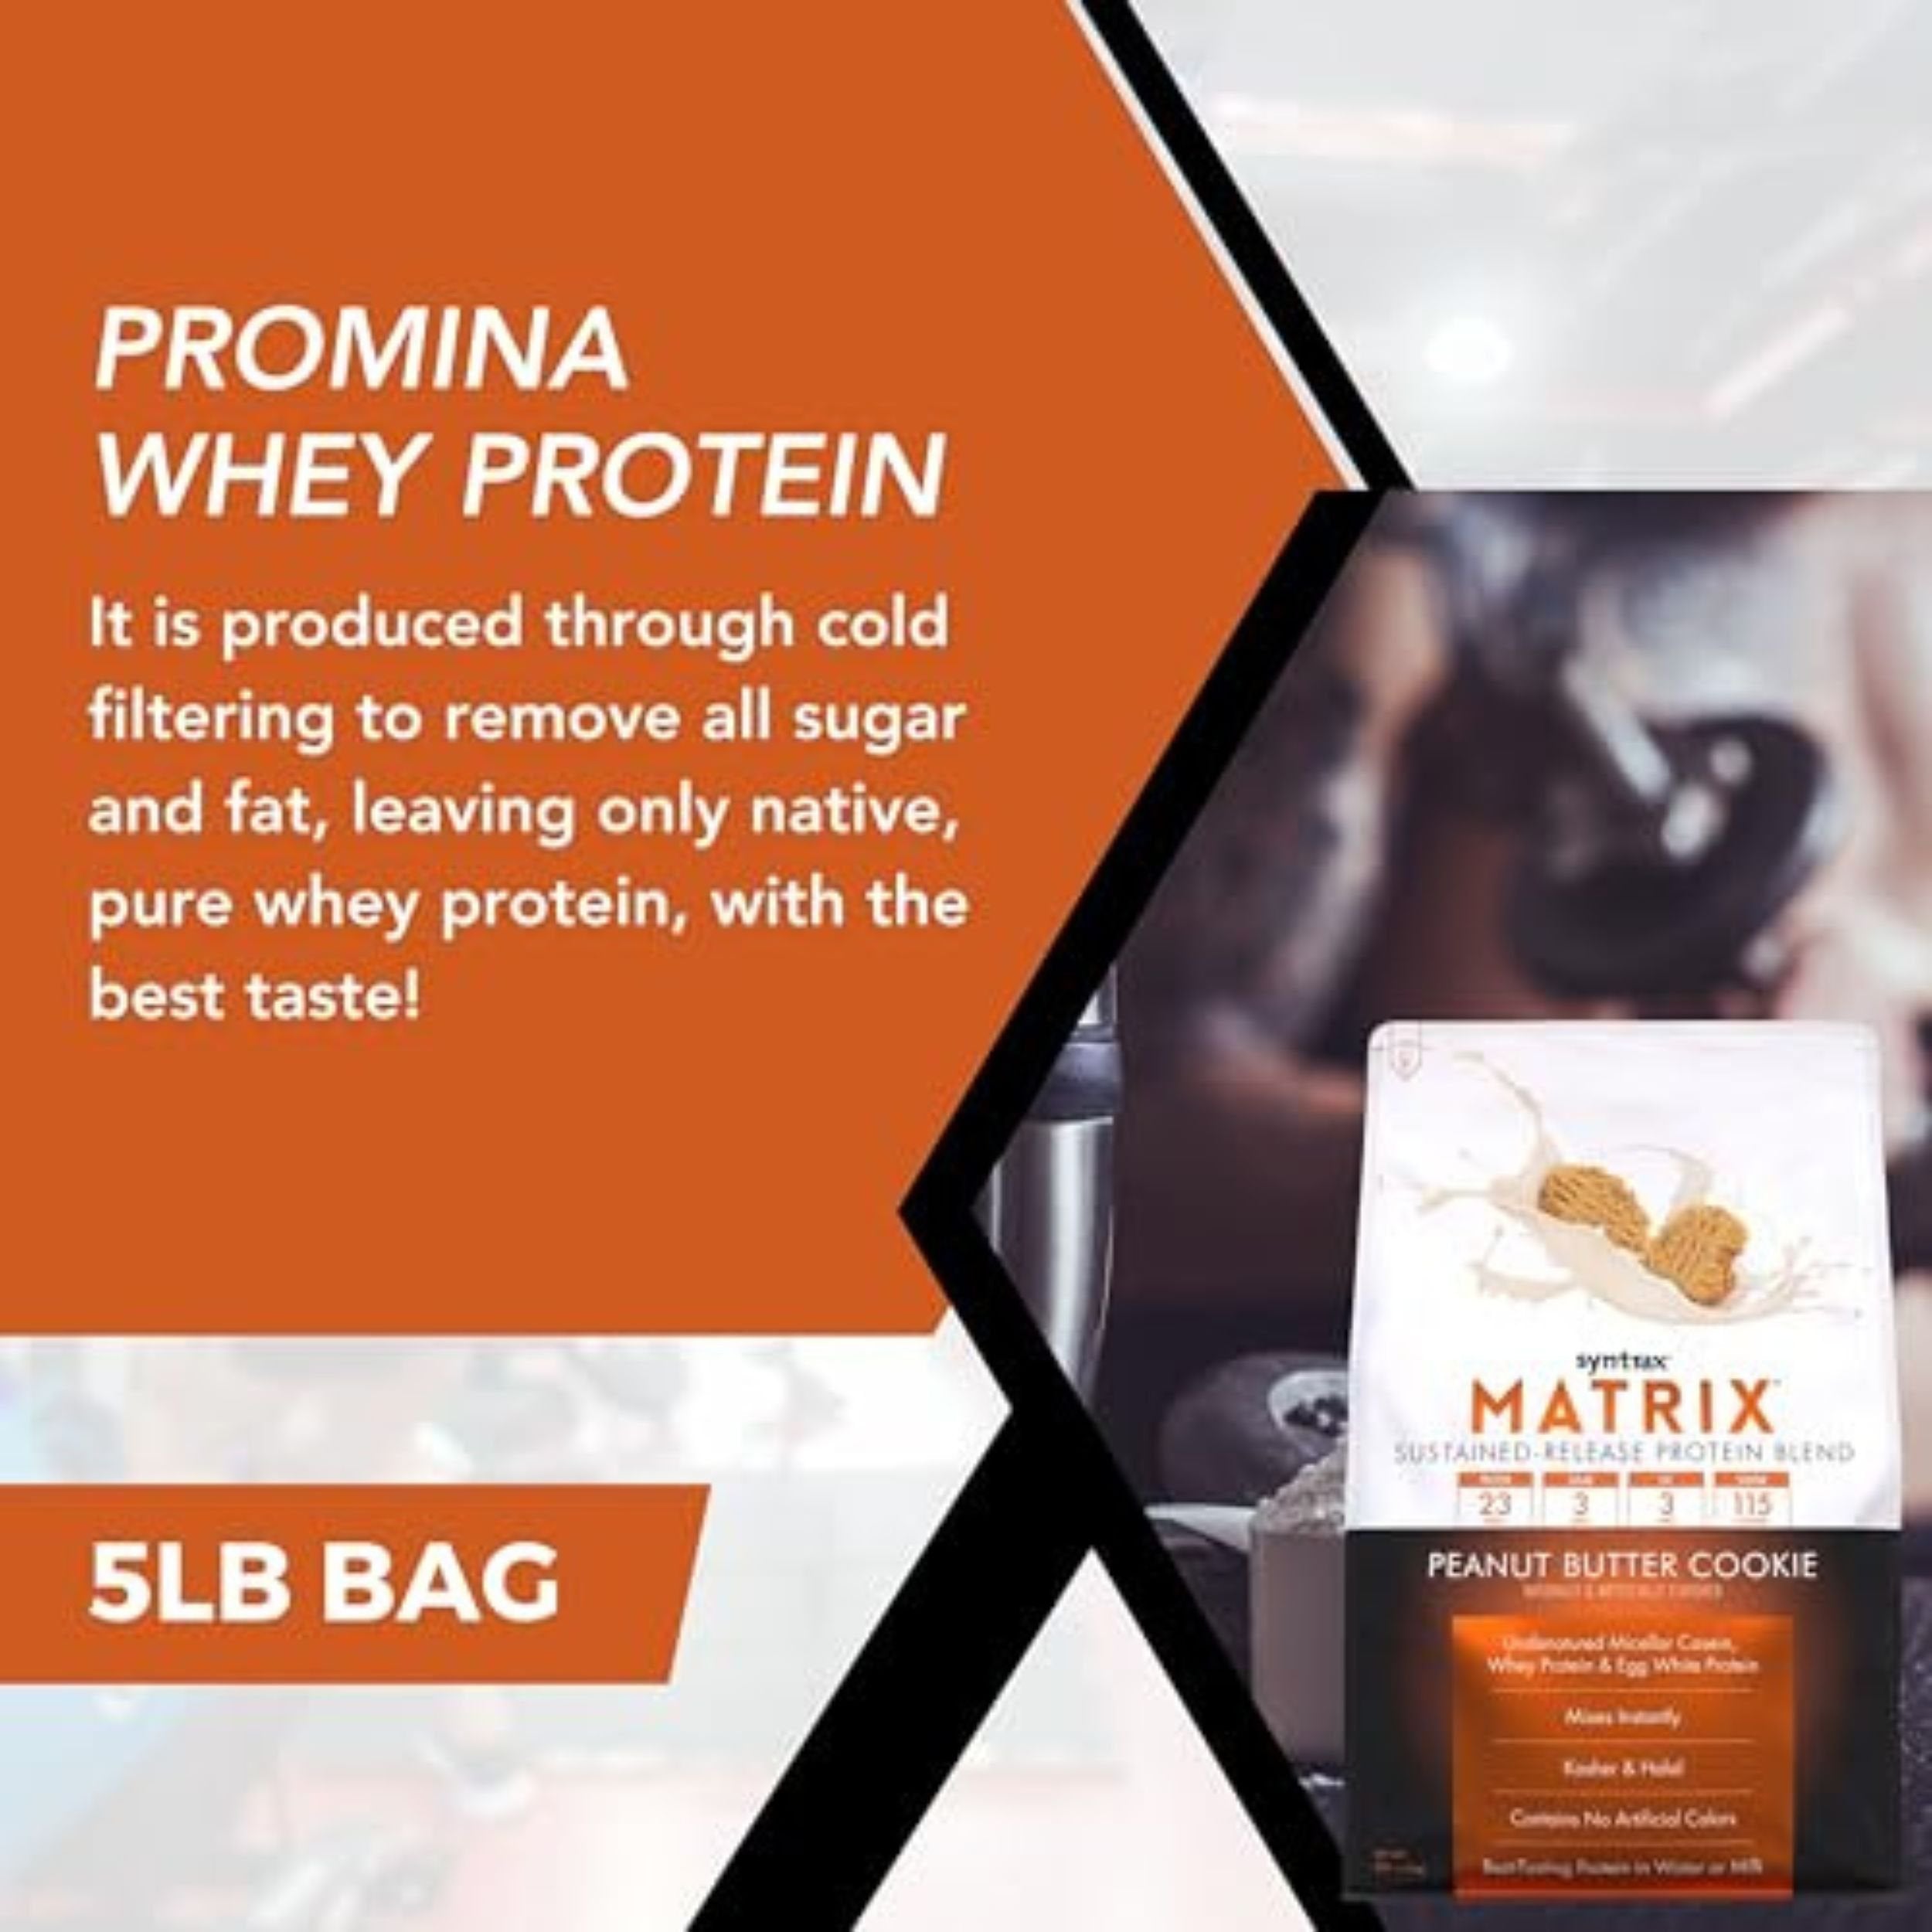 Syntrax Bundle, 2 Items Matrix Protein Powder 5.0 Sustained-Release Whey Protein Powder Blend - Instant Mix Protein Powder Peanut Butter Cookie, 5 Pounds with Worldwide Nutrition Keychain